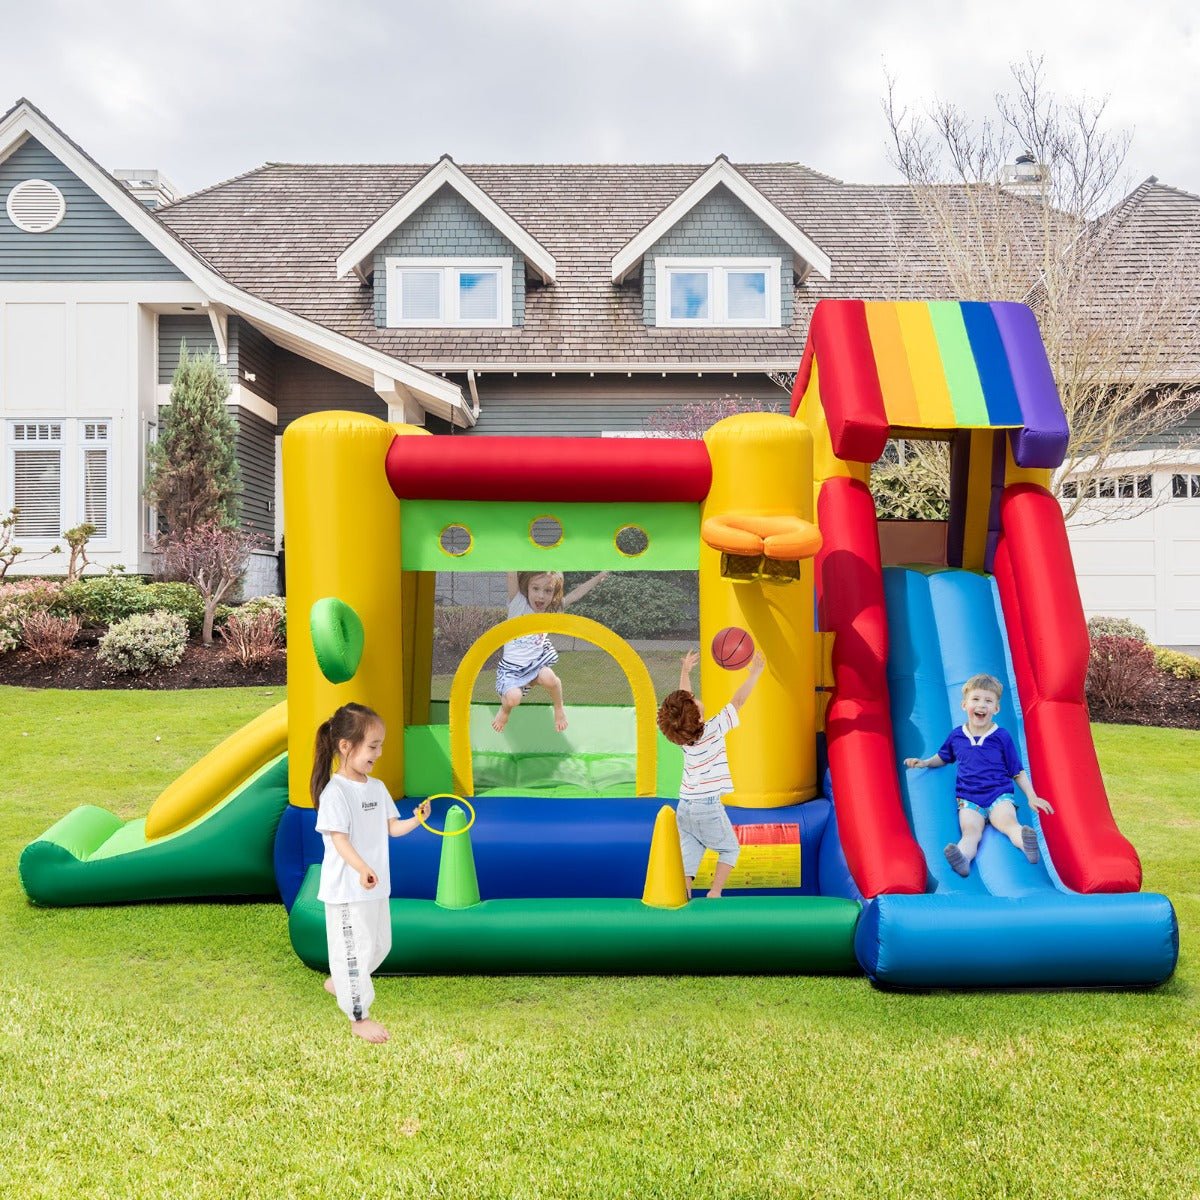 Slide into Summer with the 7-In-1 Rainbow Castle Inflatable